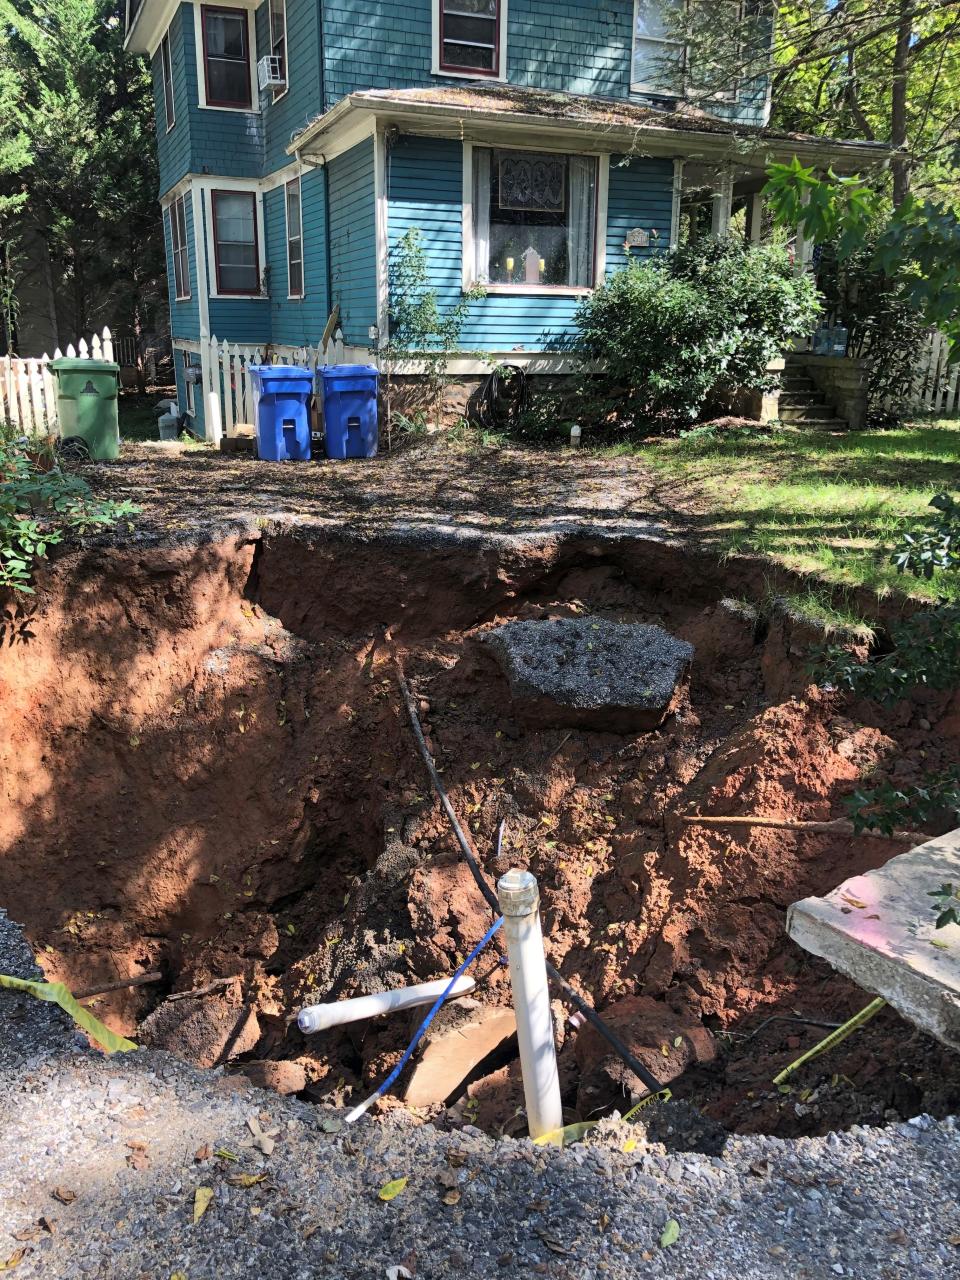 The sinkhole at 271 Montford Ave. started out small in July 2021 but was over 20 feet wide by mid-October.